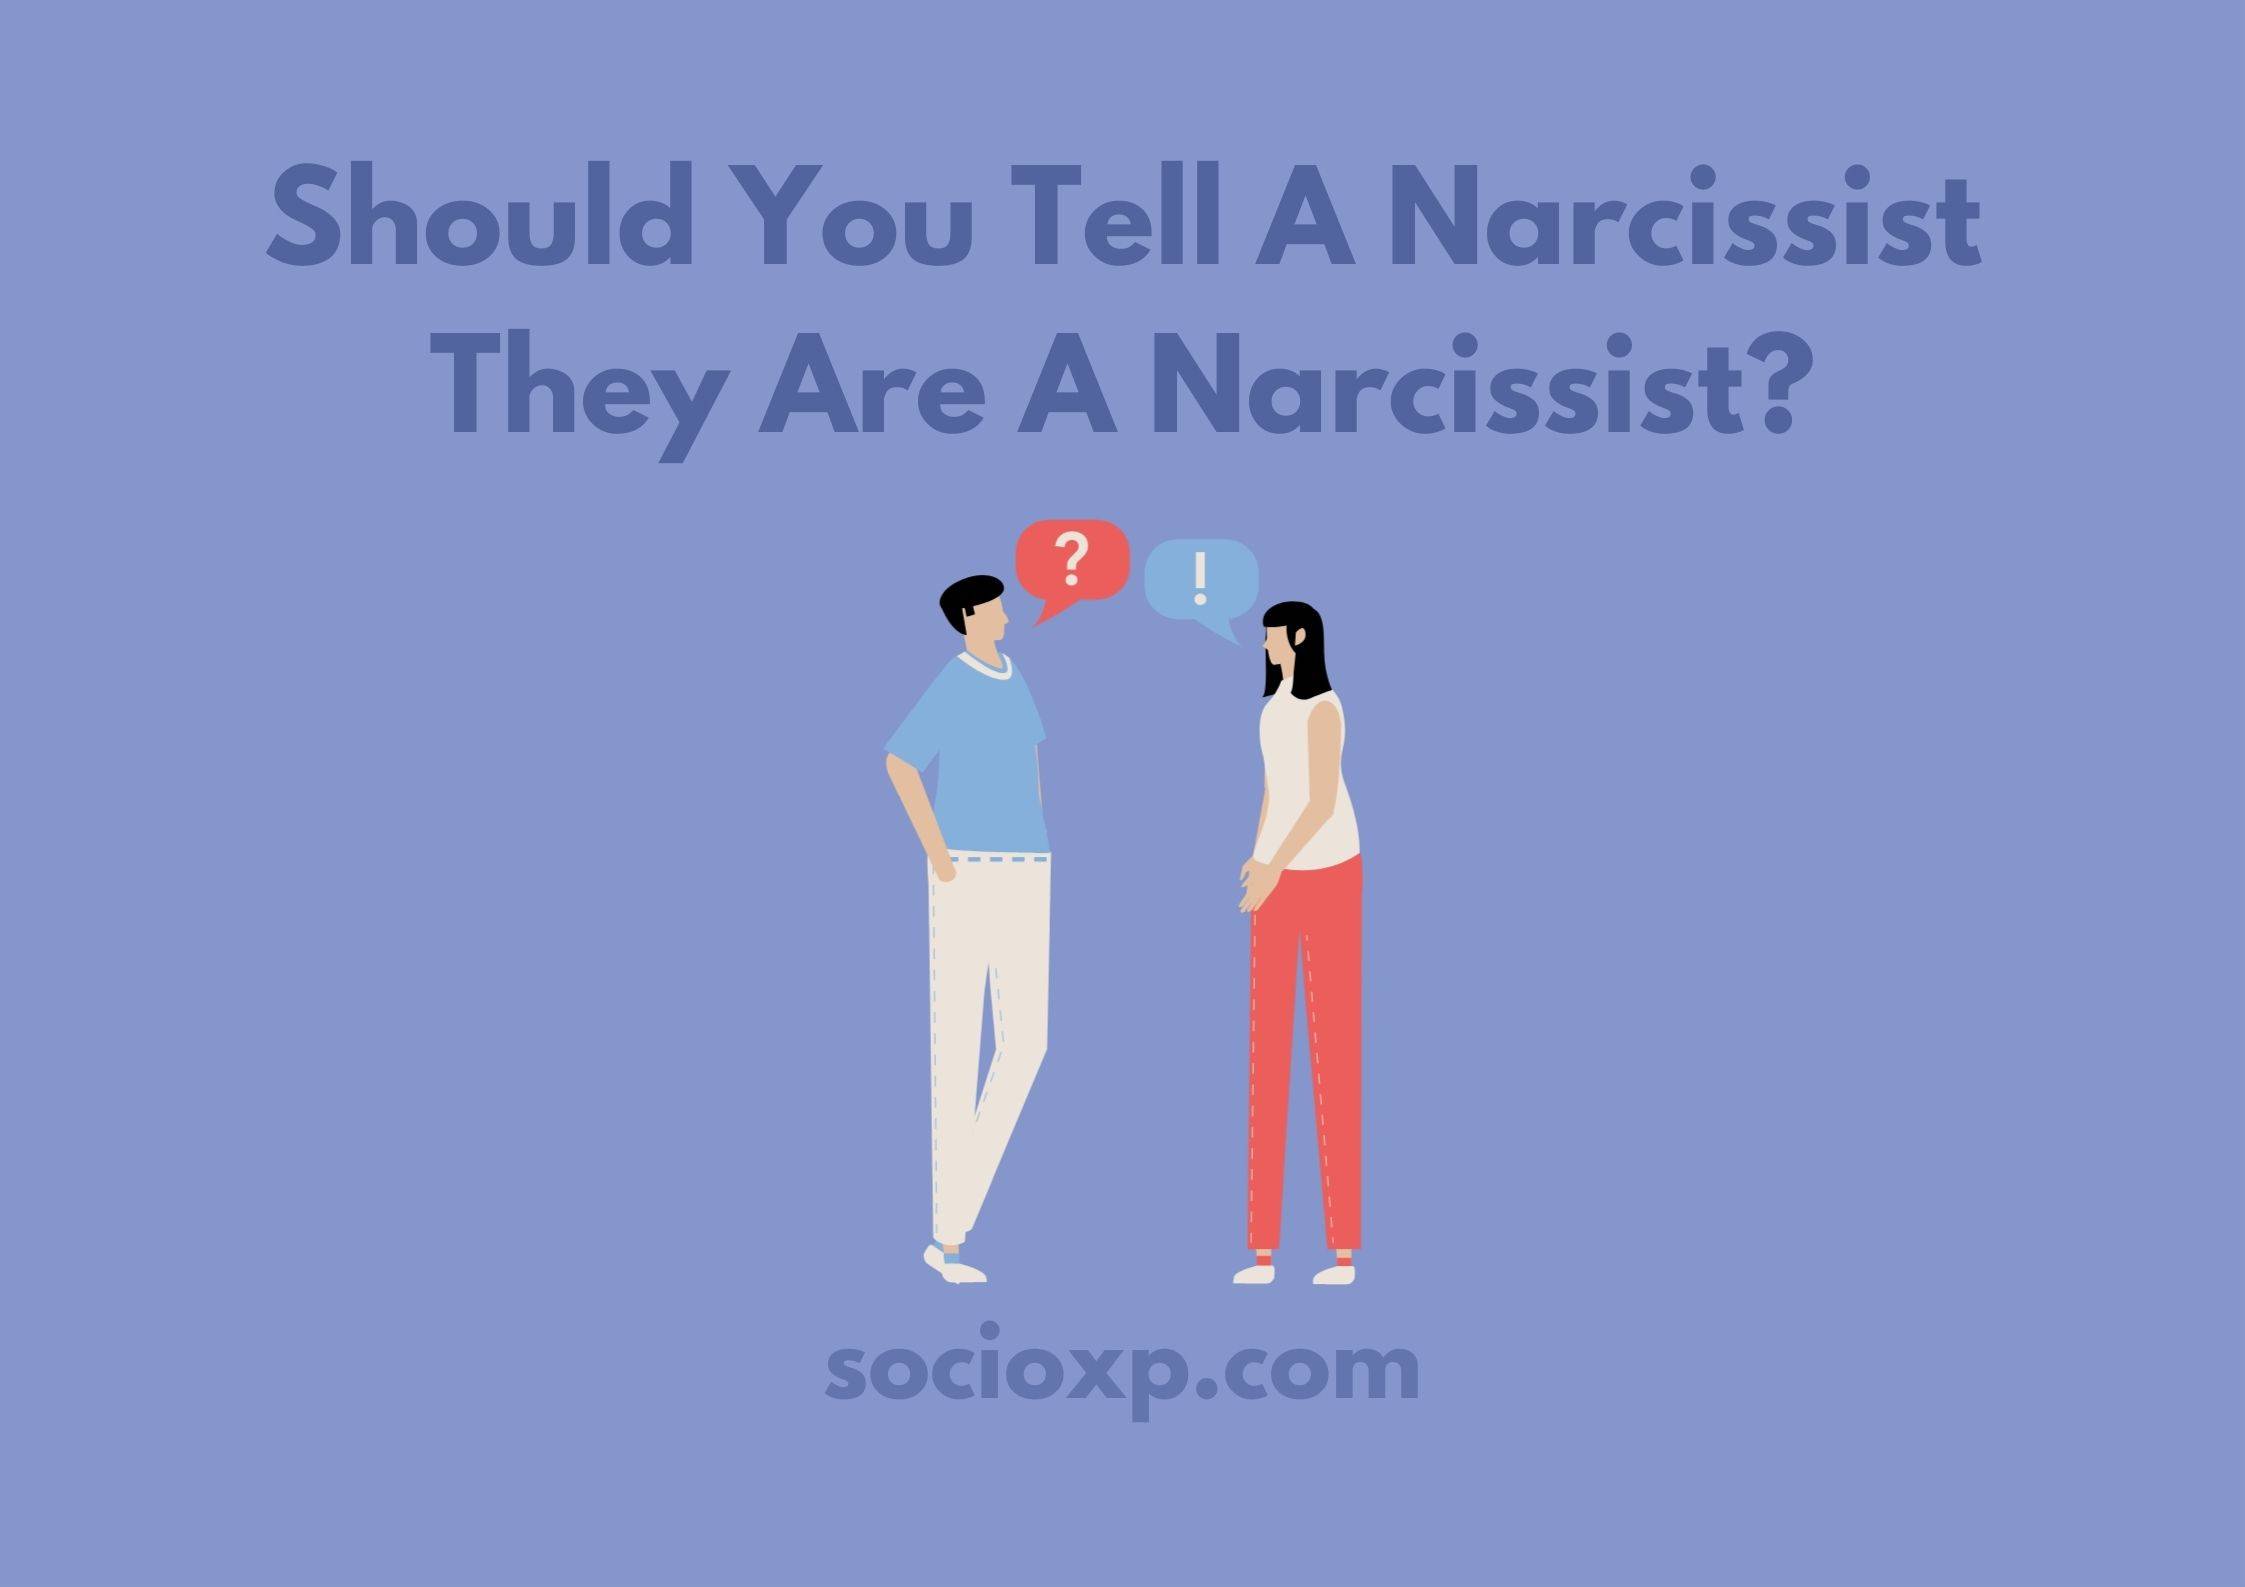 Should You Tell A Narcissist They Are A Narcissist?